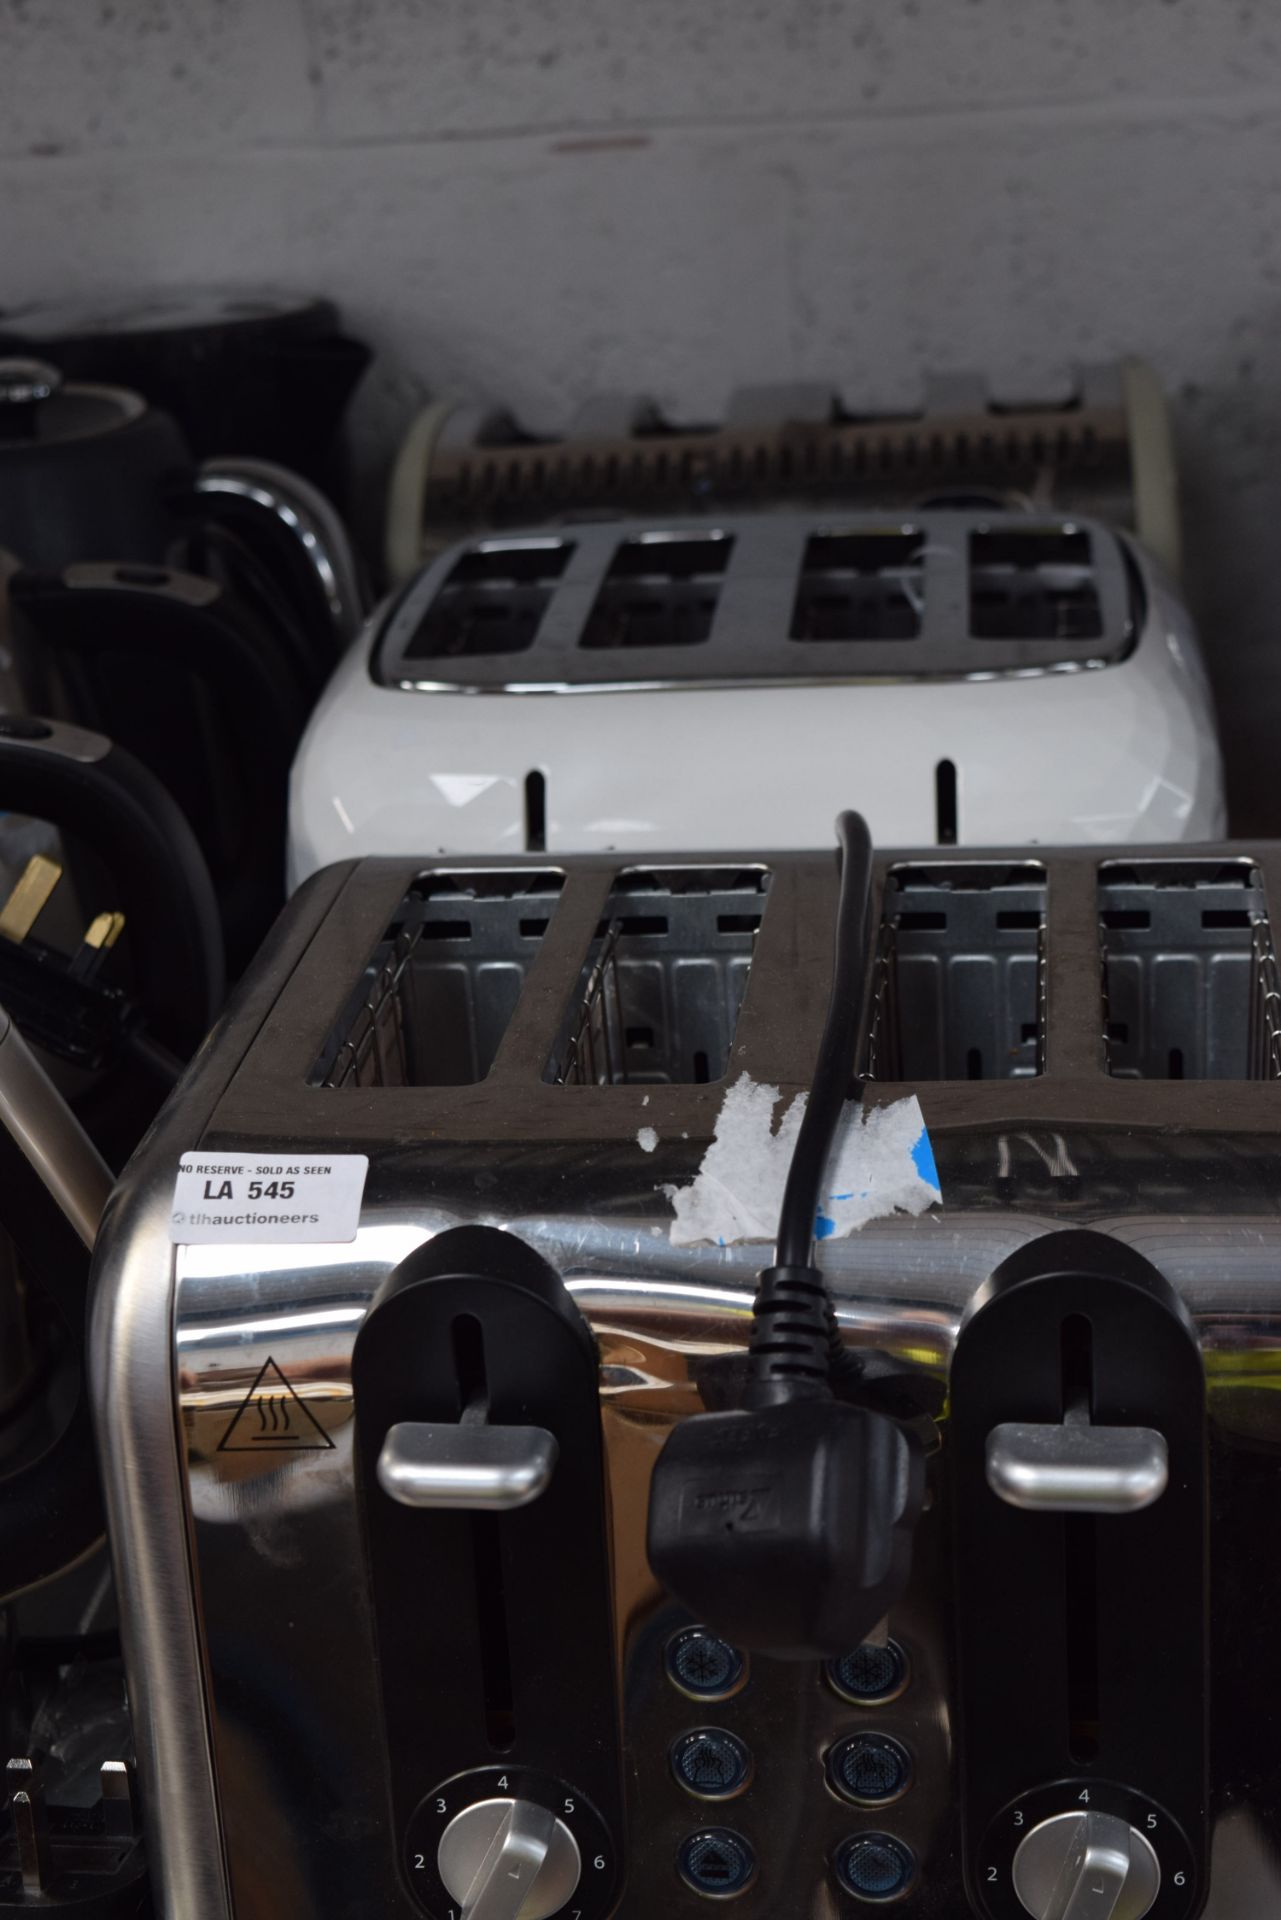 4 X ASSORTED 4-SLICE TOASTERS TO INCLUDE DELONGHI AND OTHERS PRICES RANGE FROM £45 - £85 EACH 11.